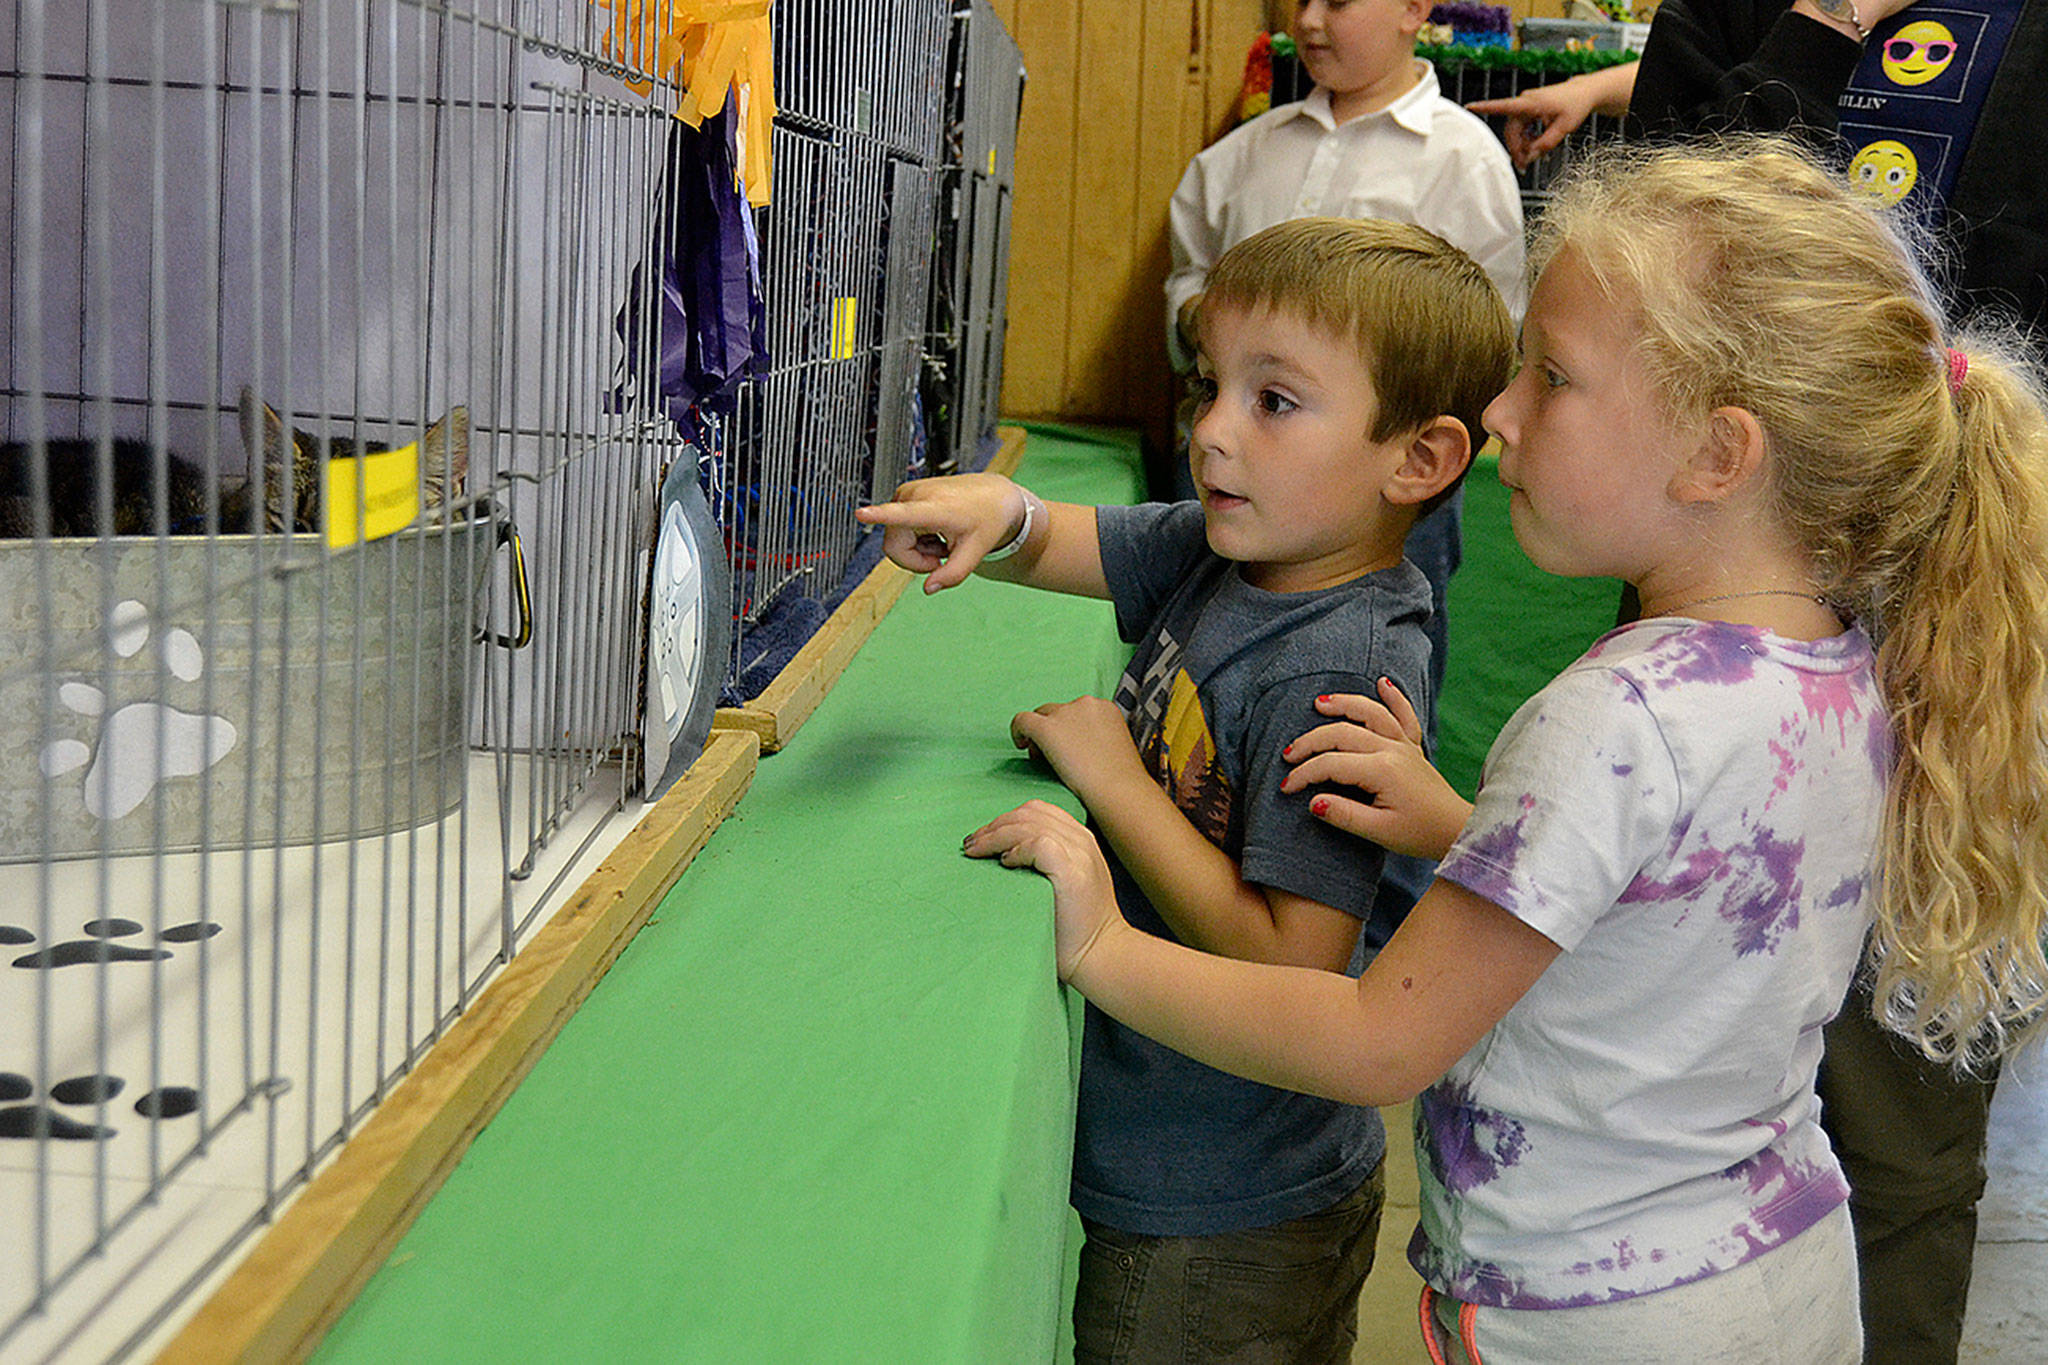 Cousins Jackson Melnick of Port Angeles and Joelle Cochran of Sequim walk cage to cage looking at cats in the Cat Barn at the 2018 Clallam County Fair. (Matthew Nash/Olympic Peninsula News Group file)